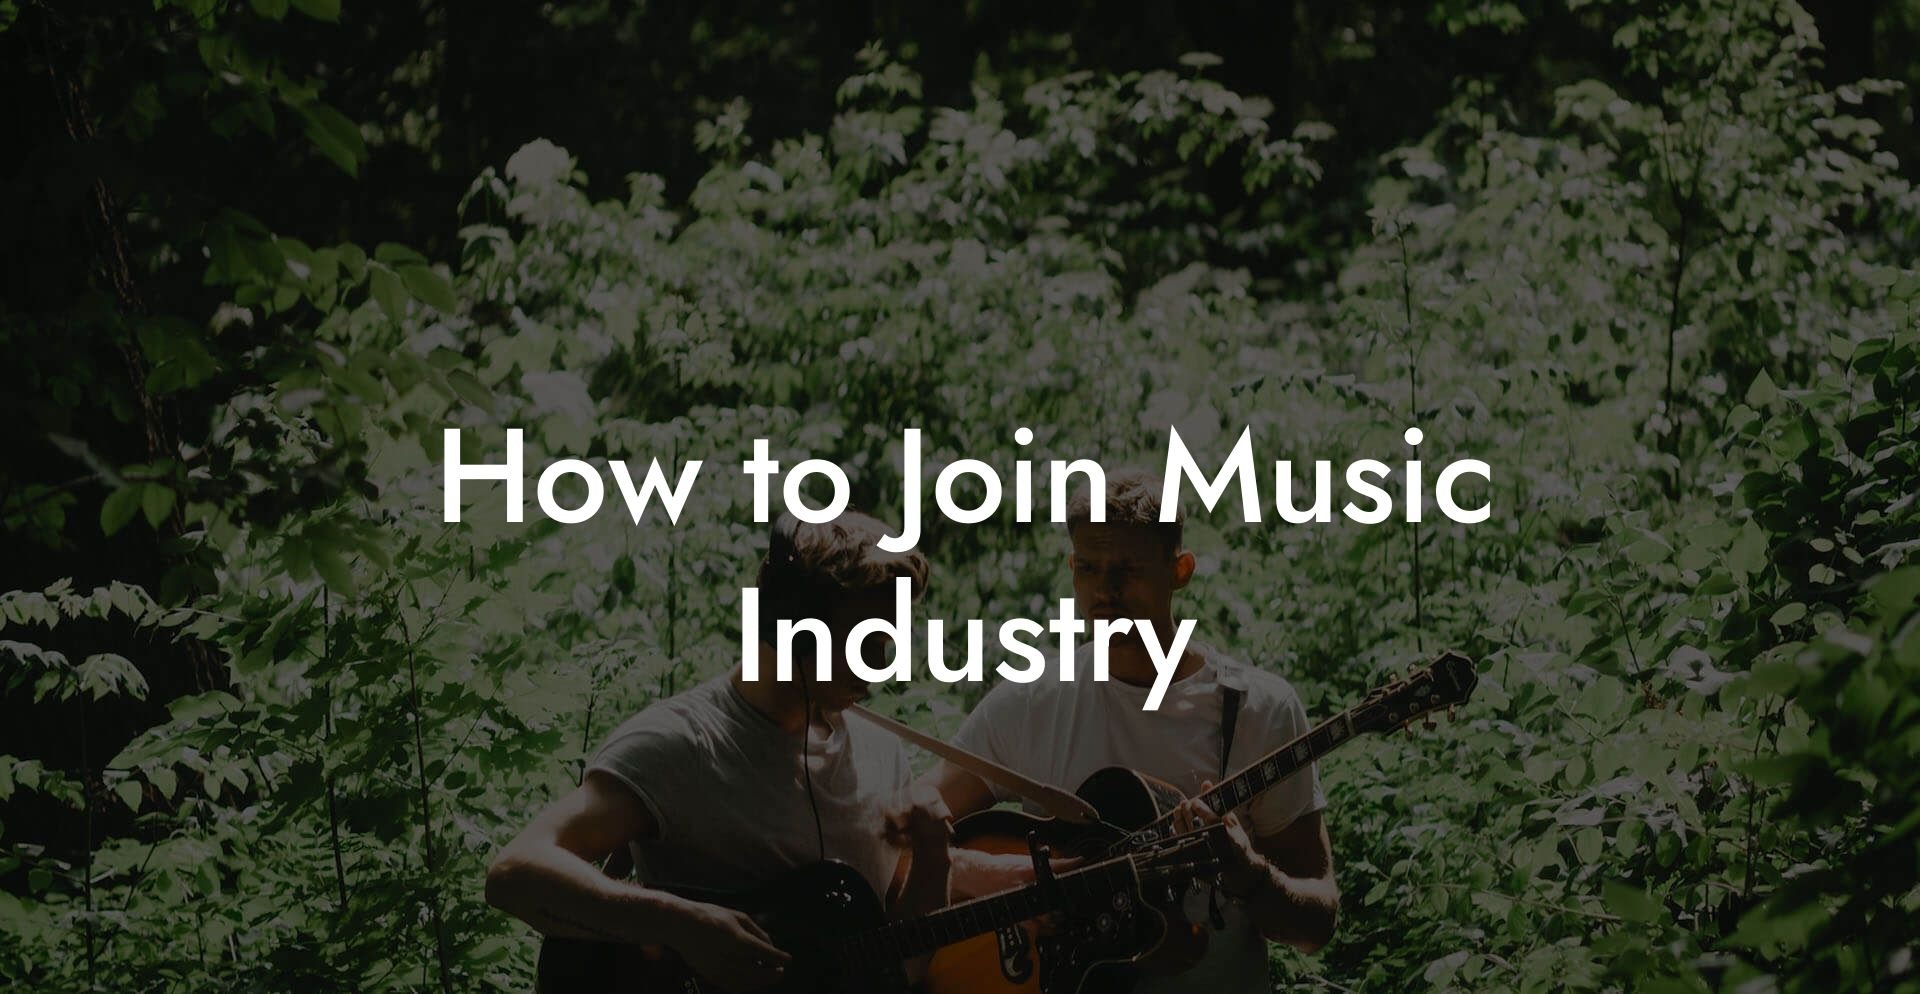 How to Join Music Industry